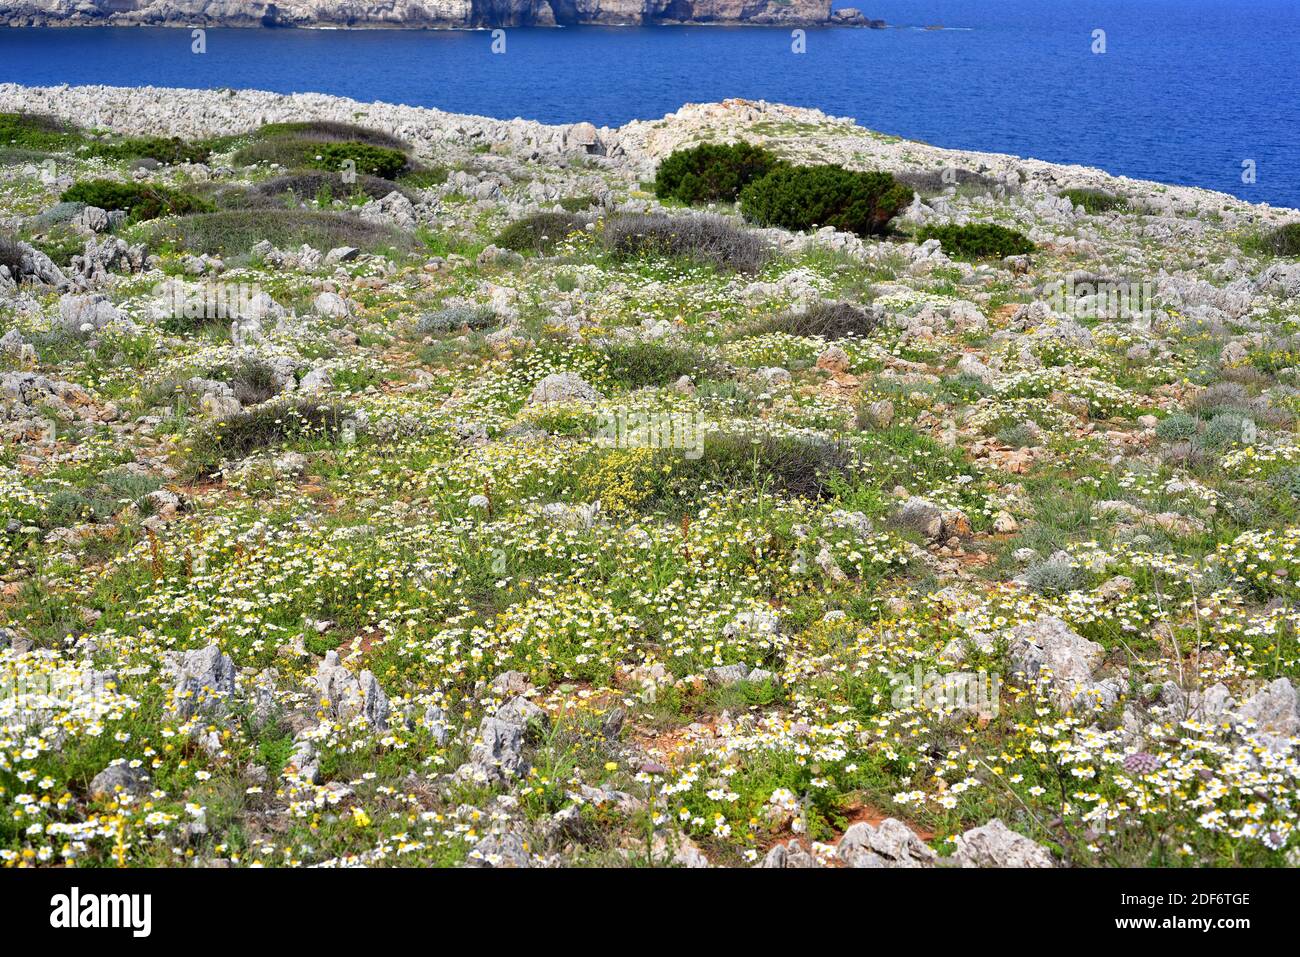 Seaside chamomile (Anthemis maritima) is a perennial herb native to western Mediterranean Basin. This photo was taken in Cala Morell, Menorca, Stock Photo